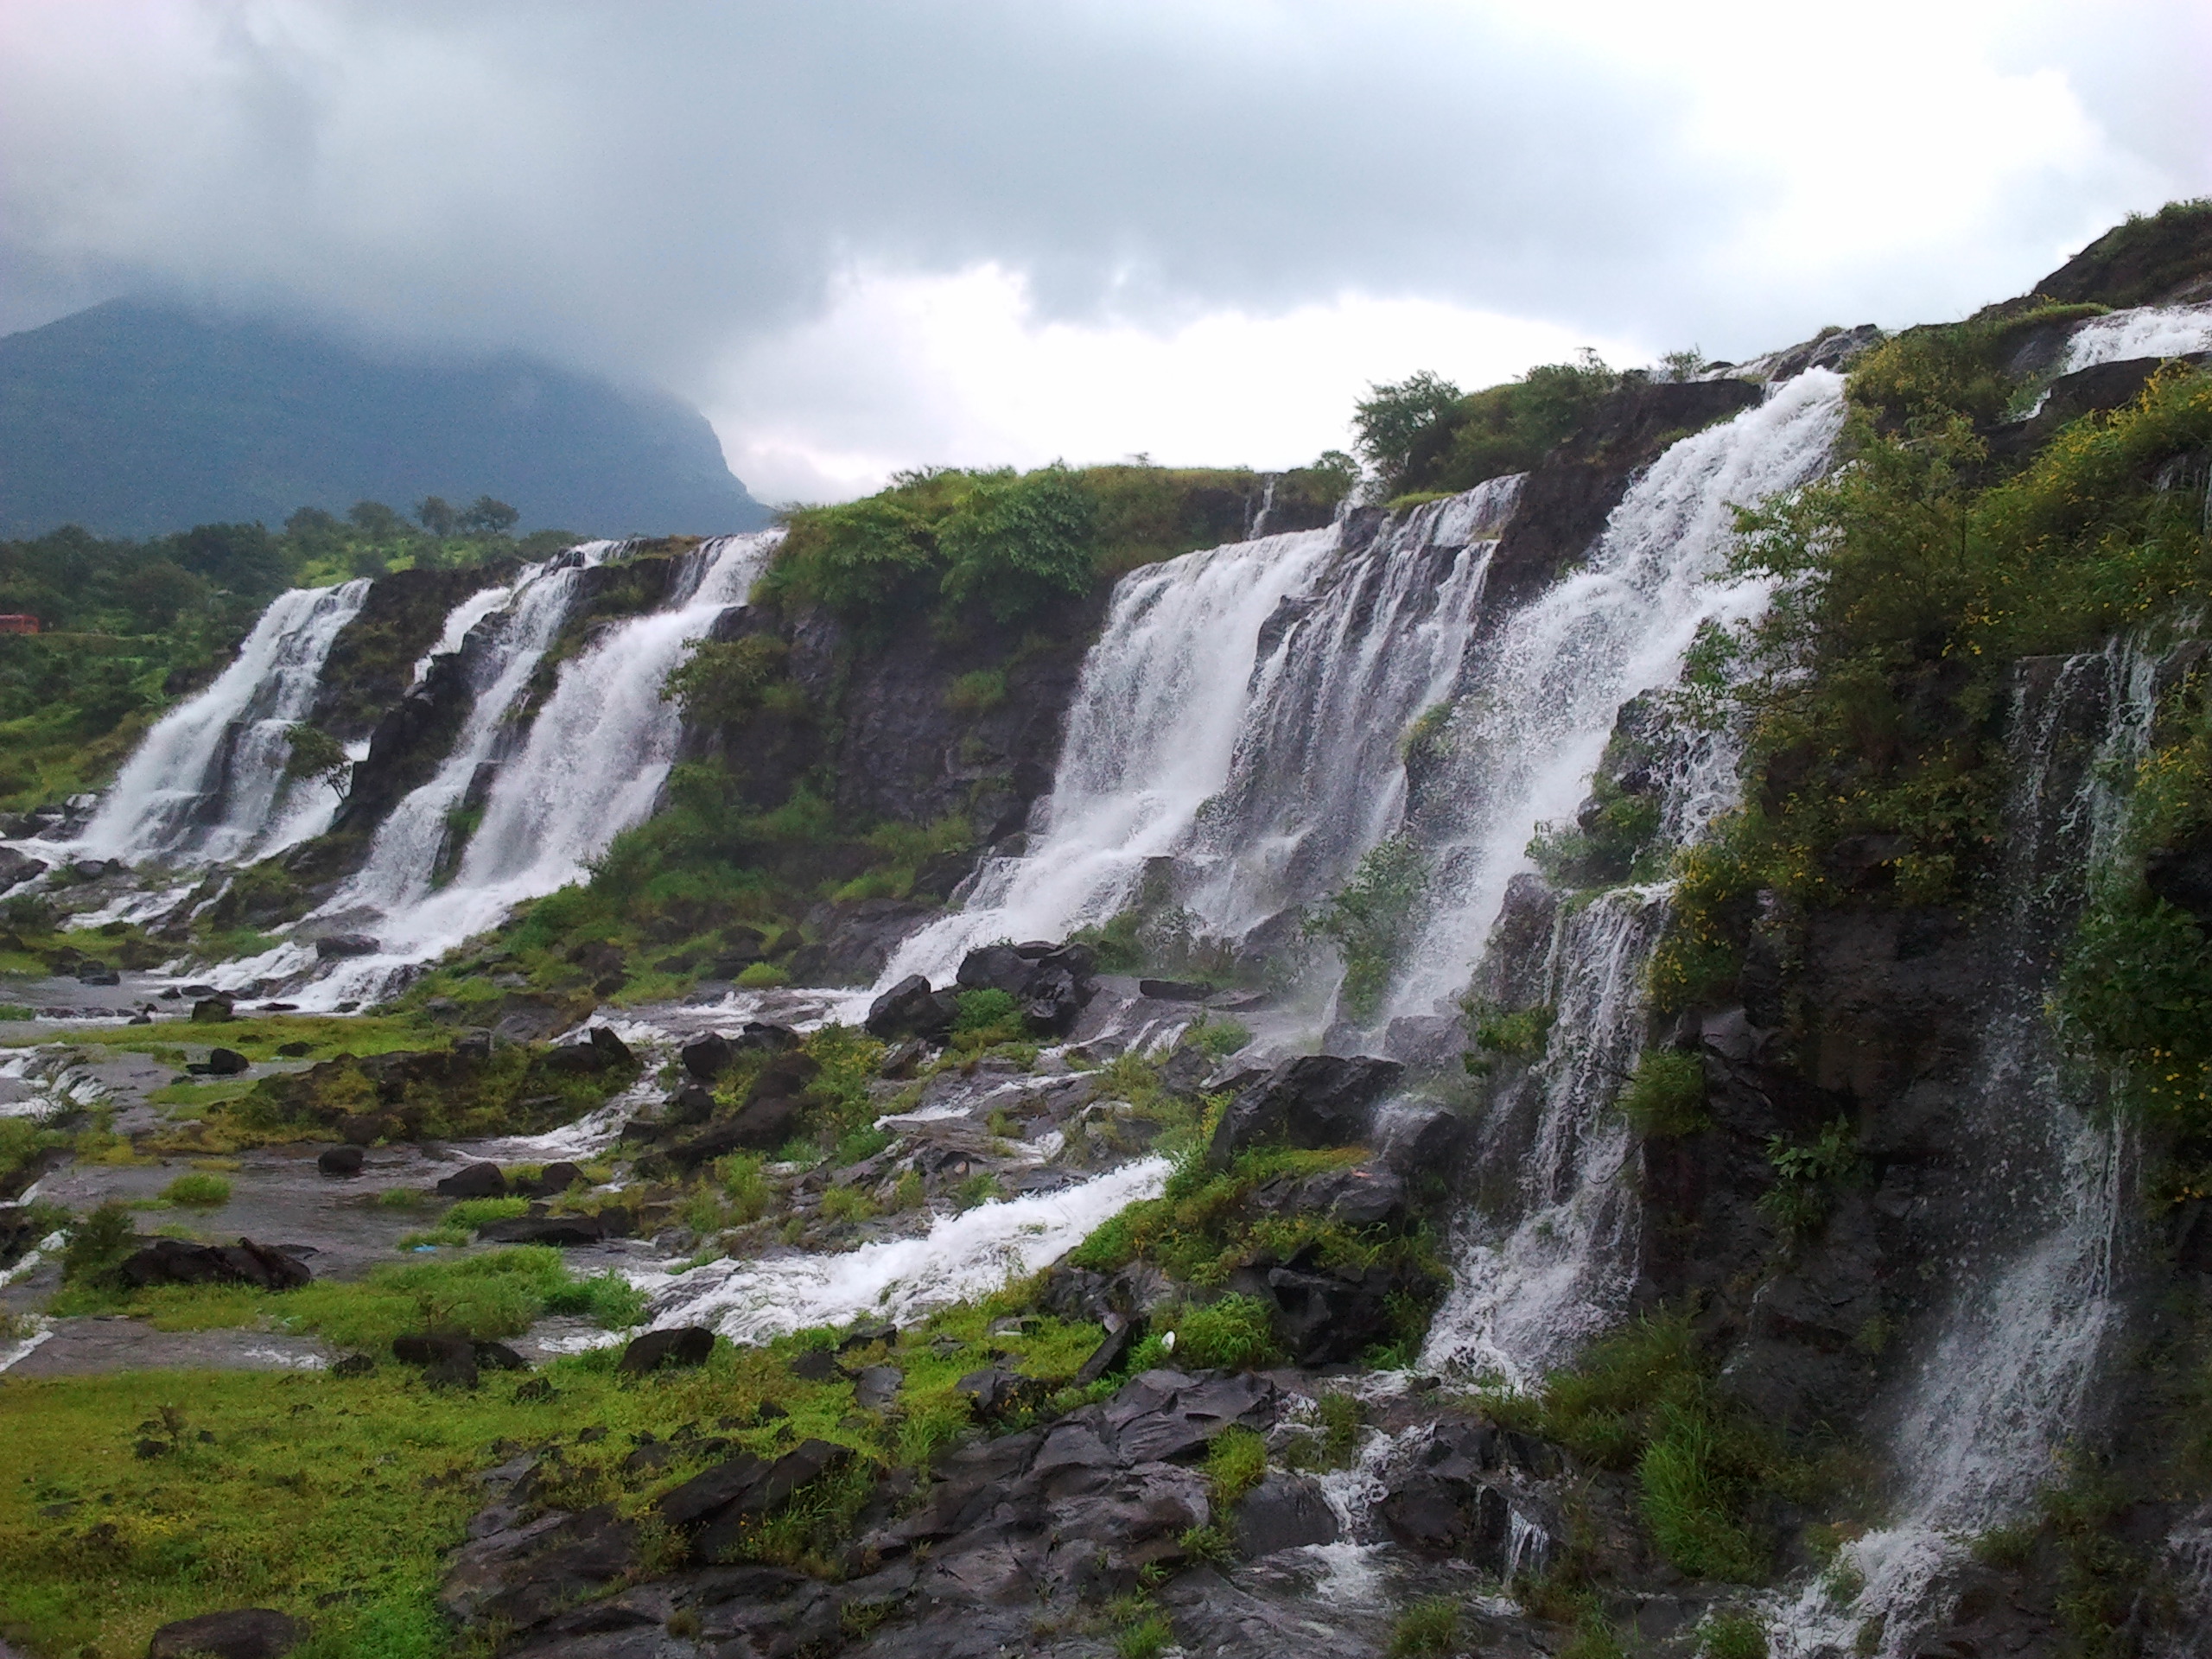 Bhandardara Camping: All you need to know about the camping